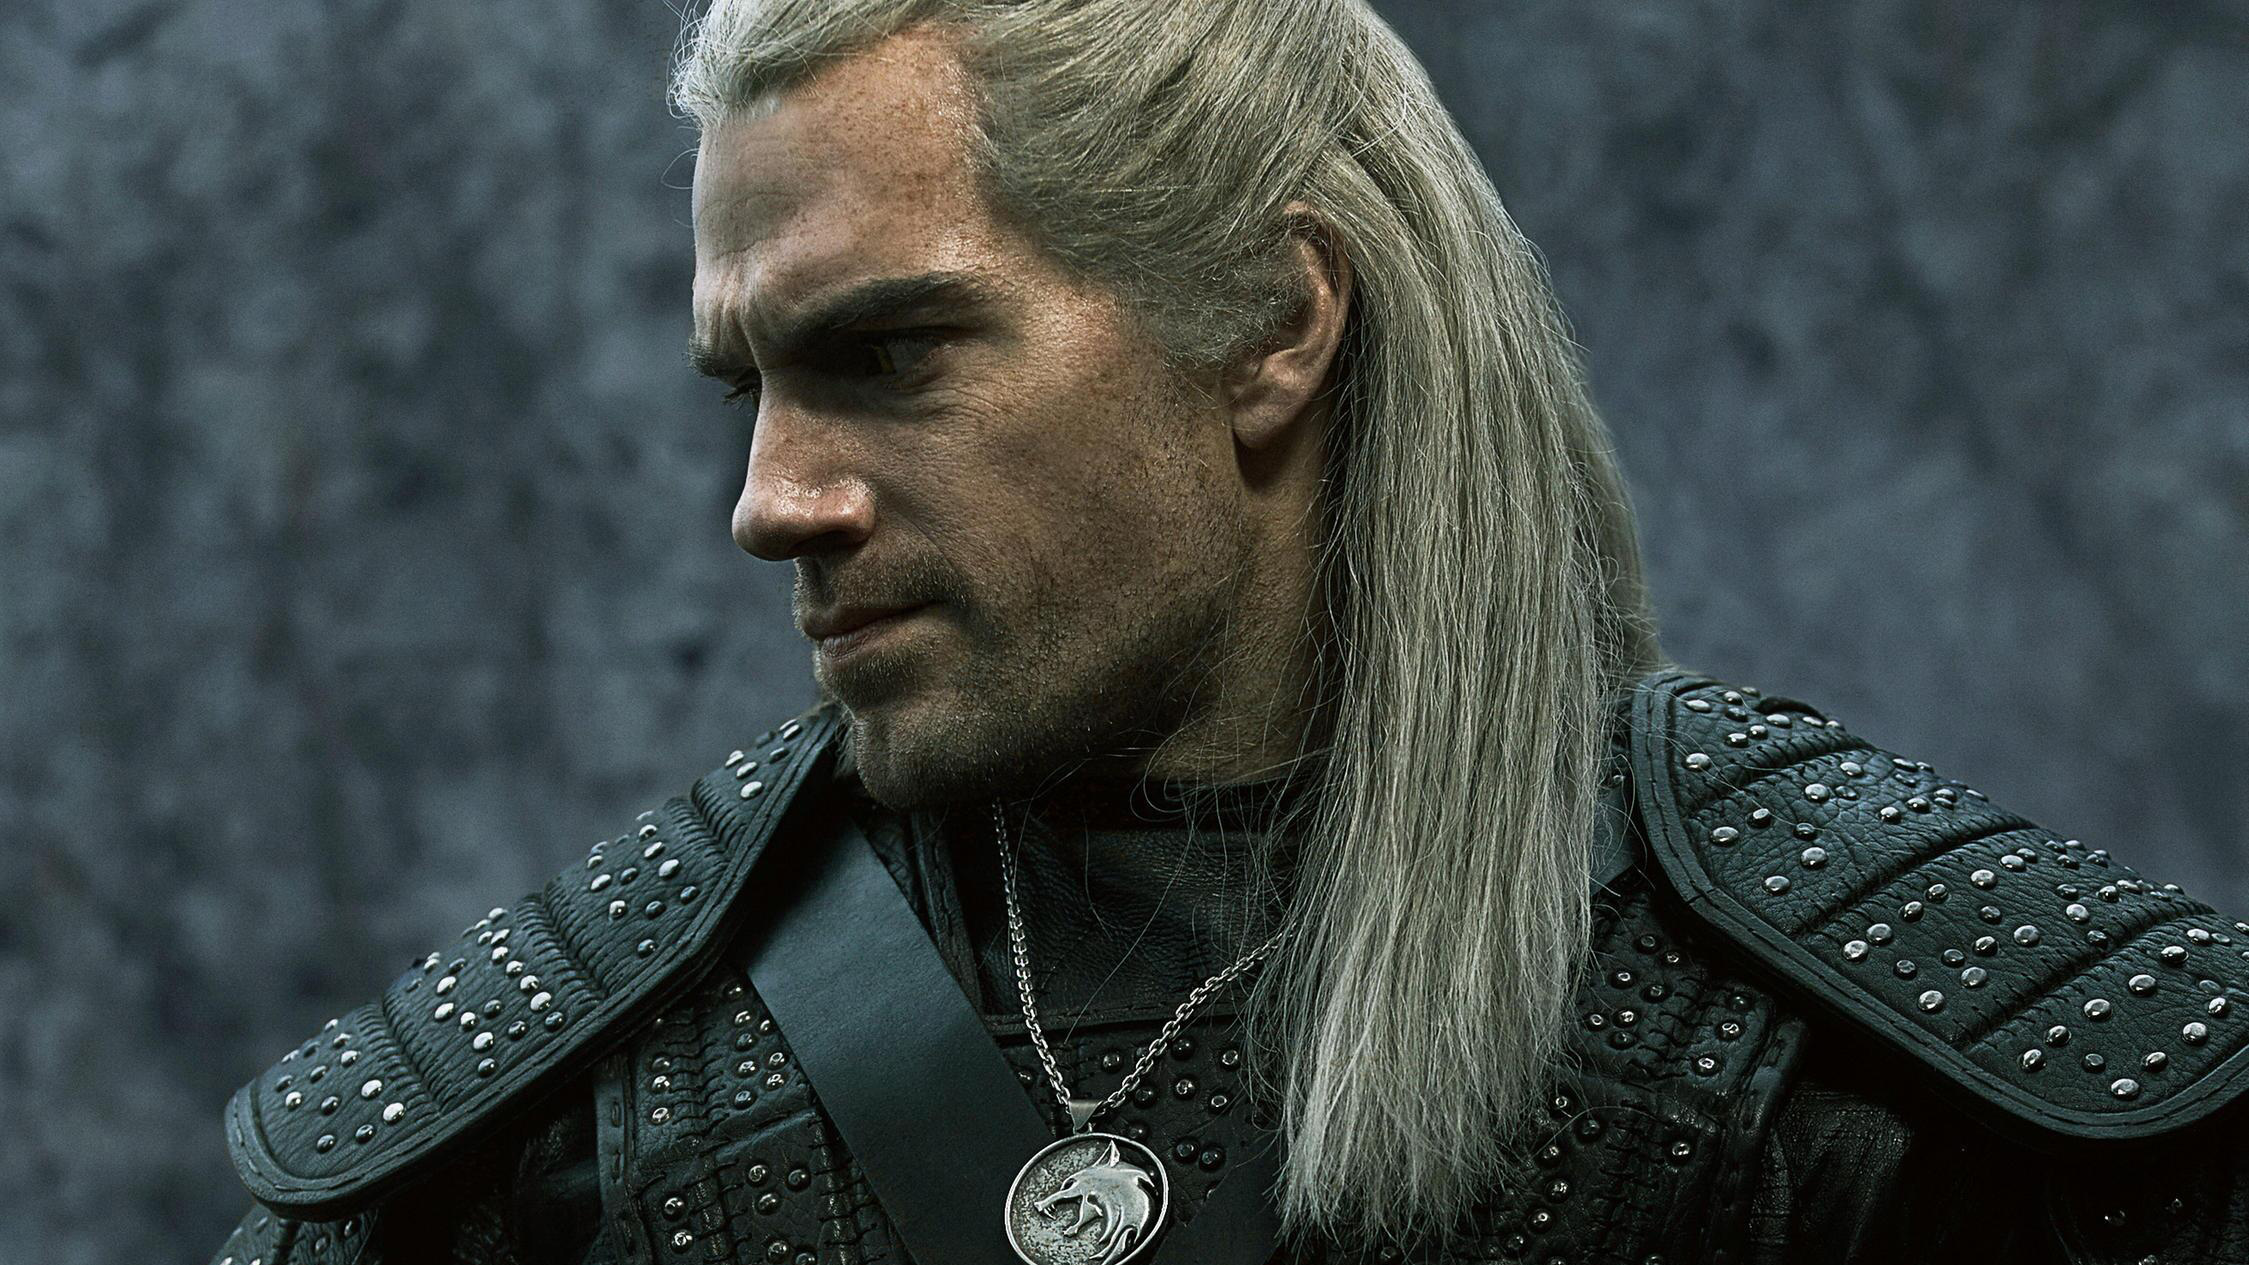 Henry Cavill Geralt The Witcher 2019 Hd Tv Shows 4k Wallpapers 39184 Hot Sex Picture